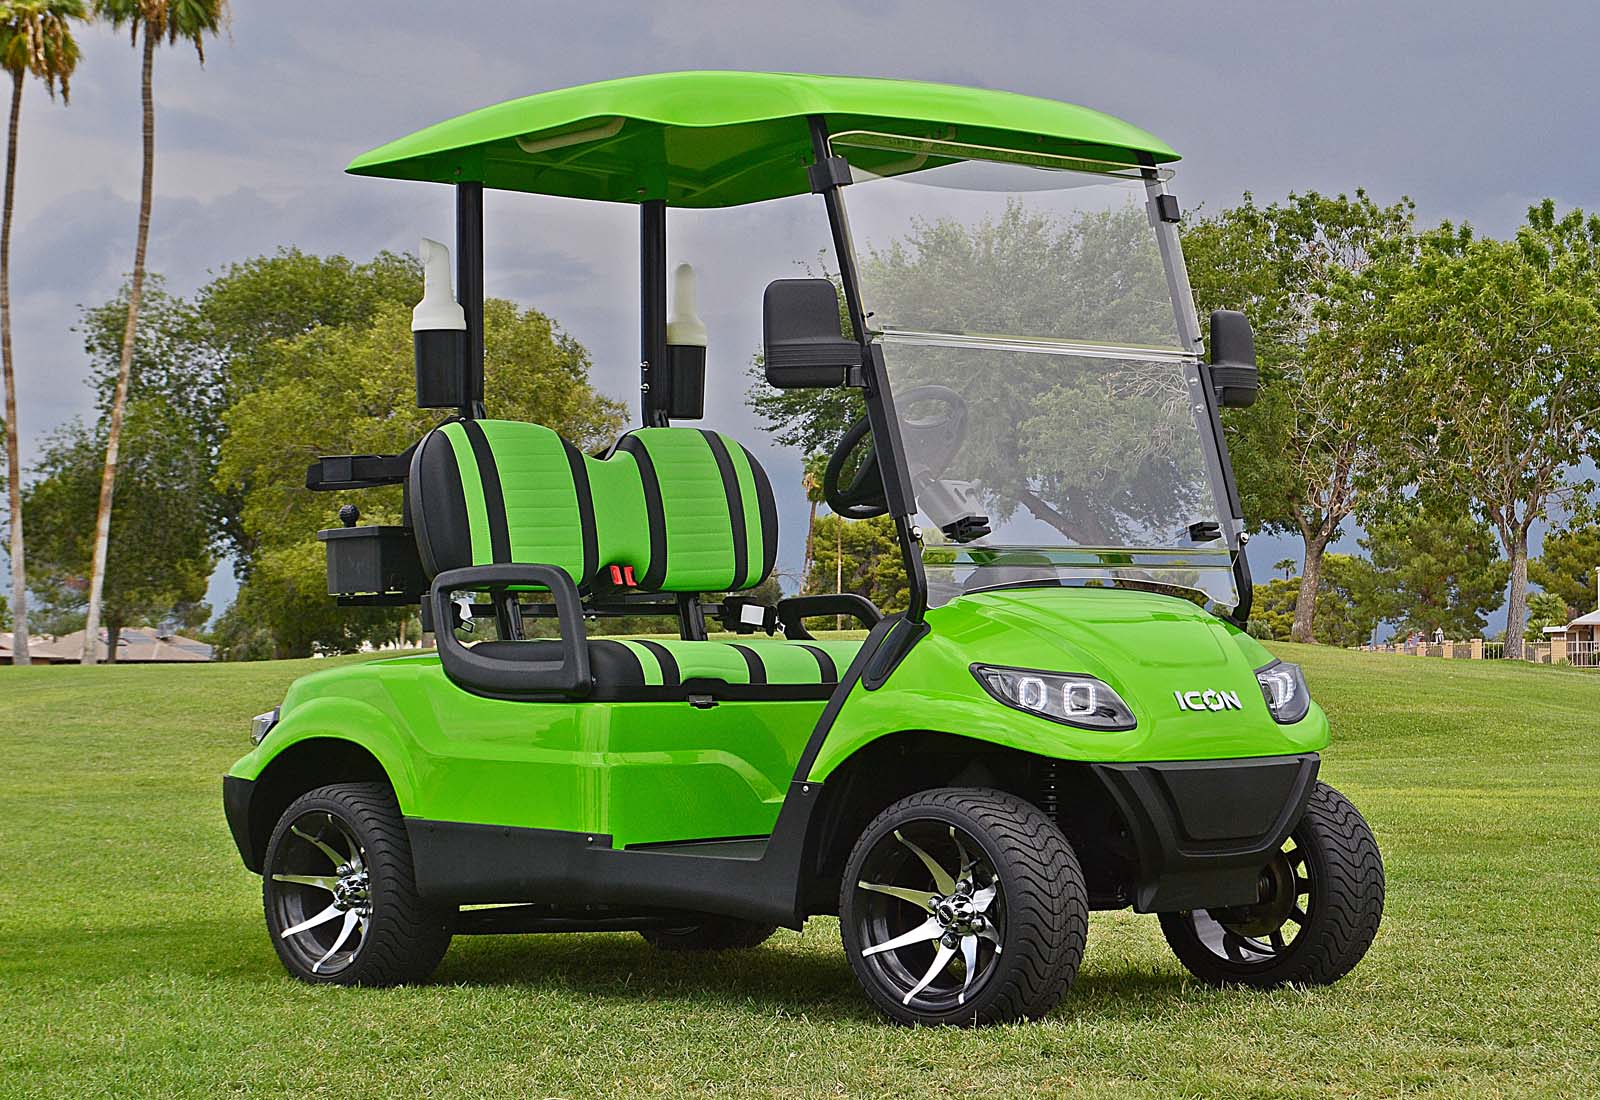 ICON i20 Golf Cart Features